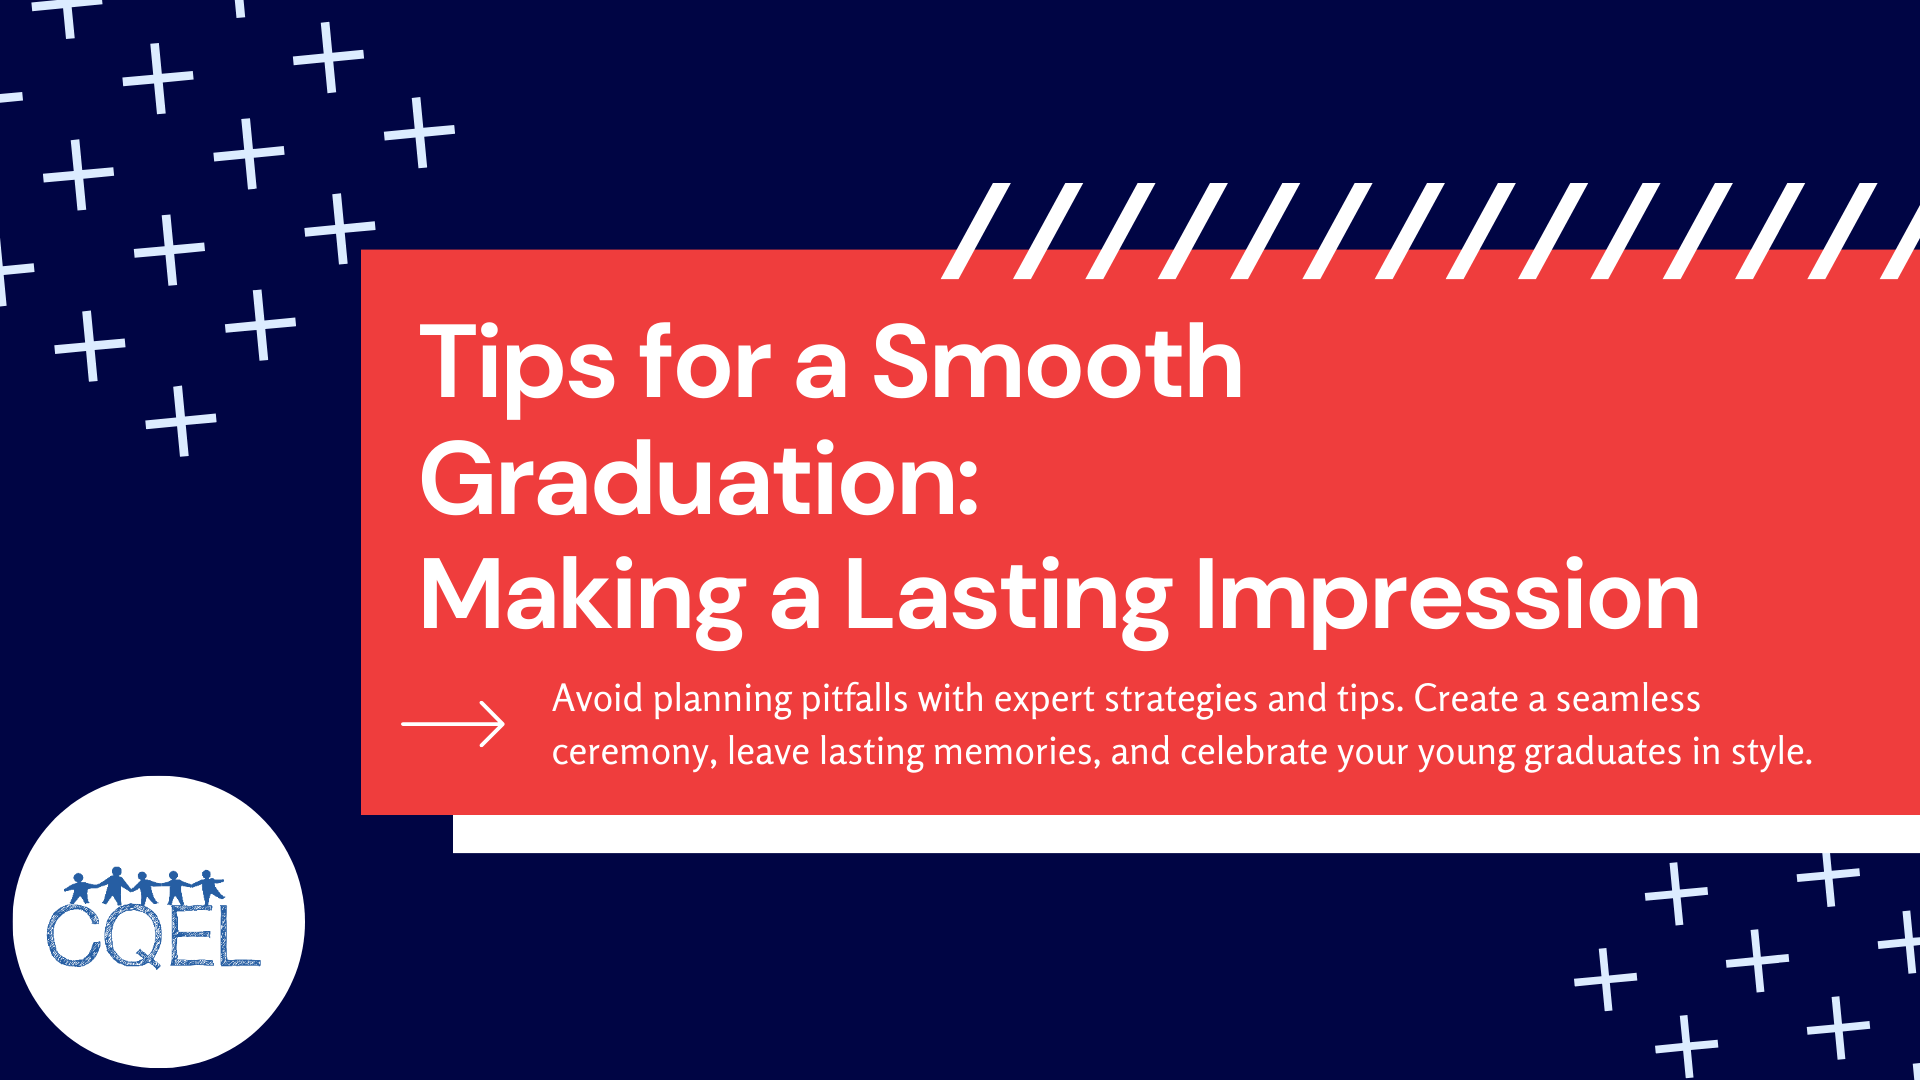 Tips for a Smooth Graduation: Making a Lasting Impression